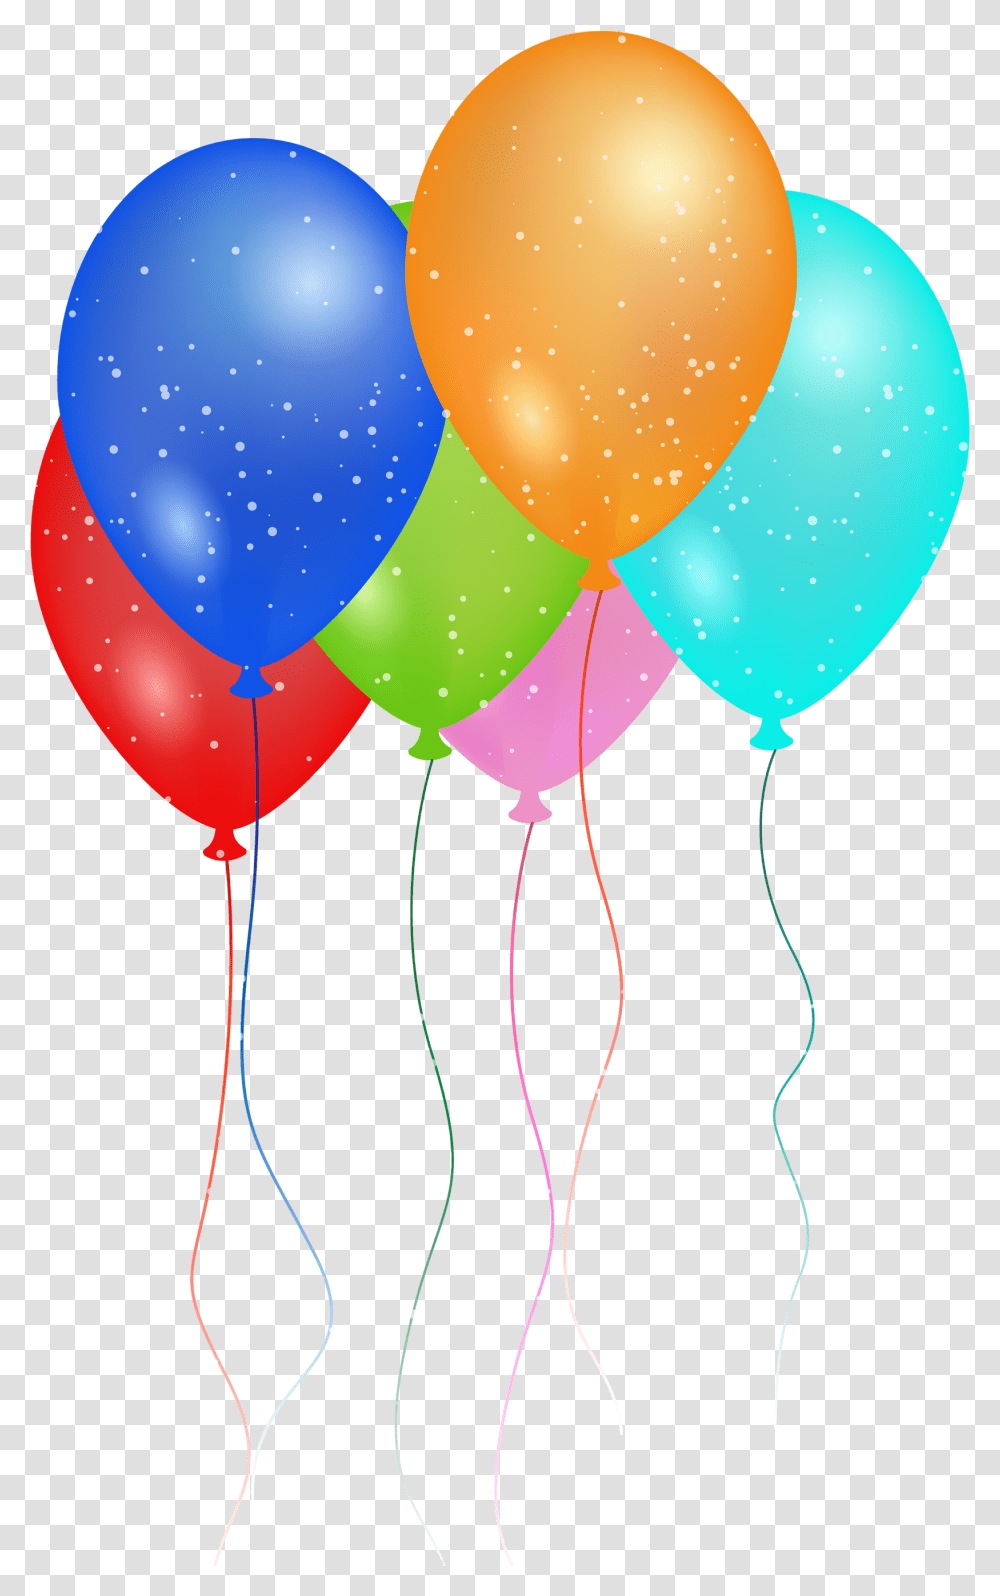 Birthday Party Balloon Image Happy Birthday Balloons Images Transparent Png